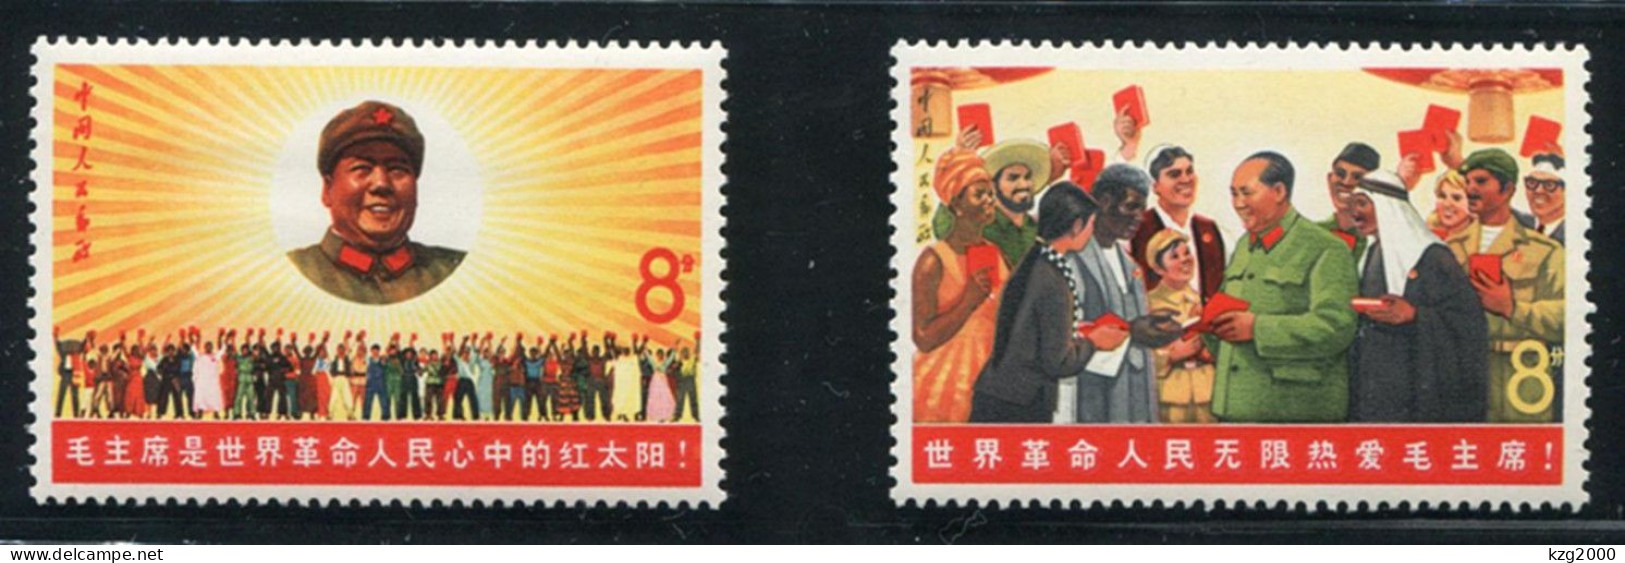 China Stamp 1967 W6  Chairman Mao  With People Of The World  OG Stamps - Nuevos